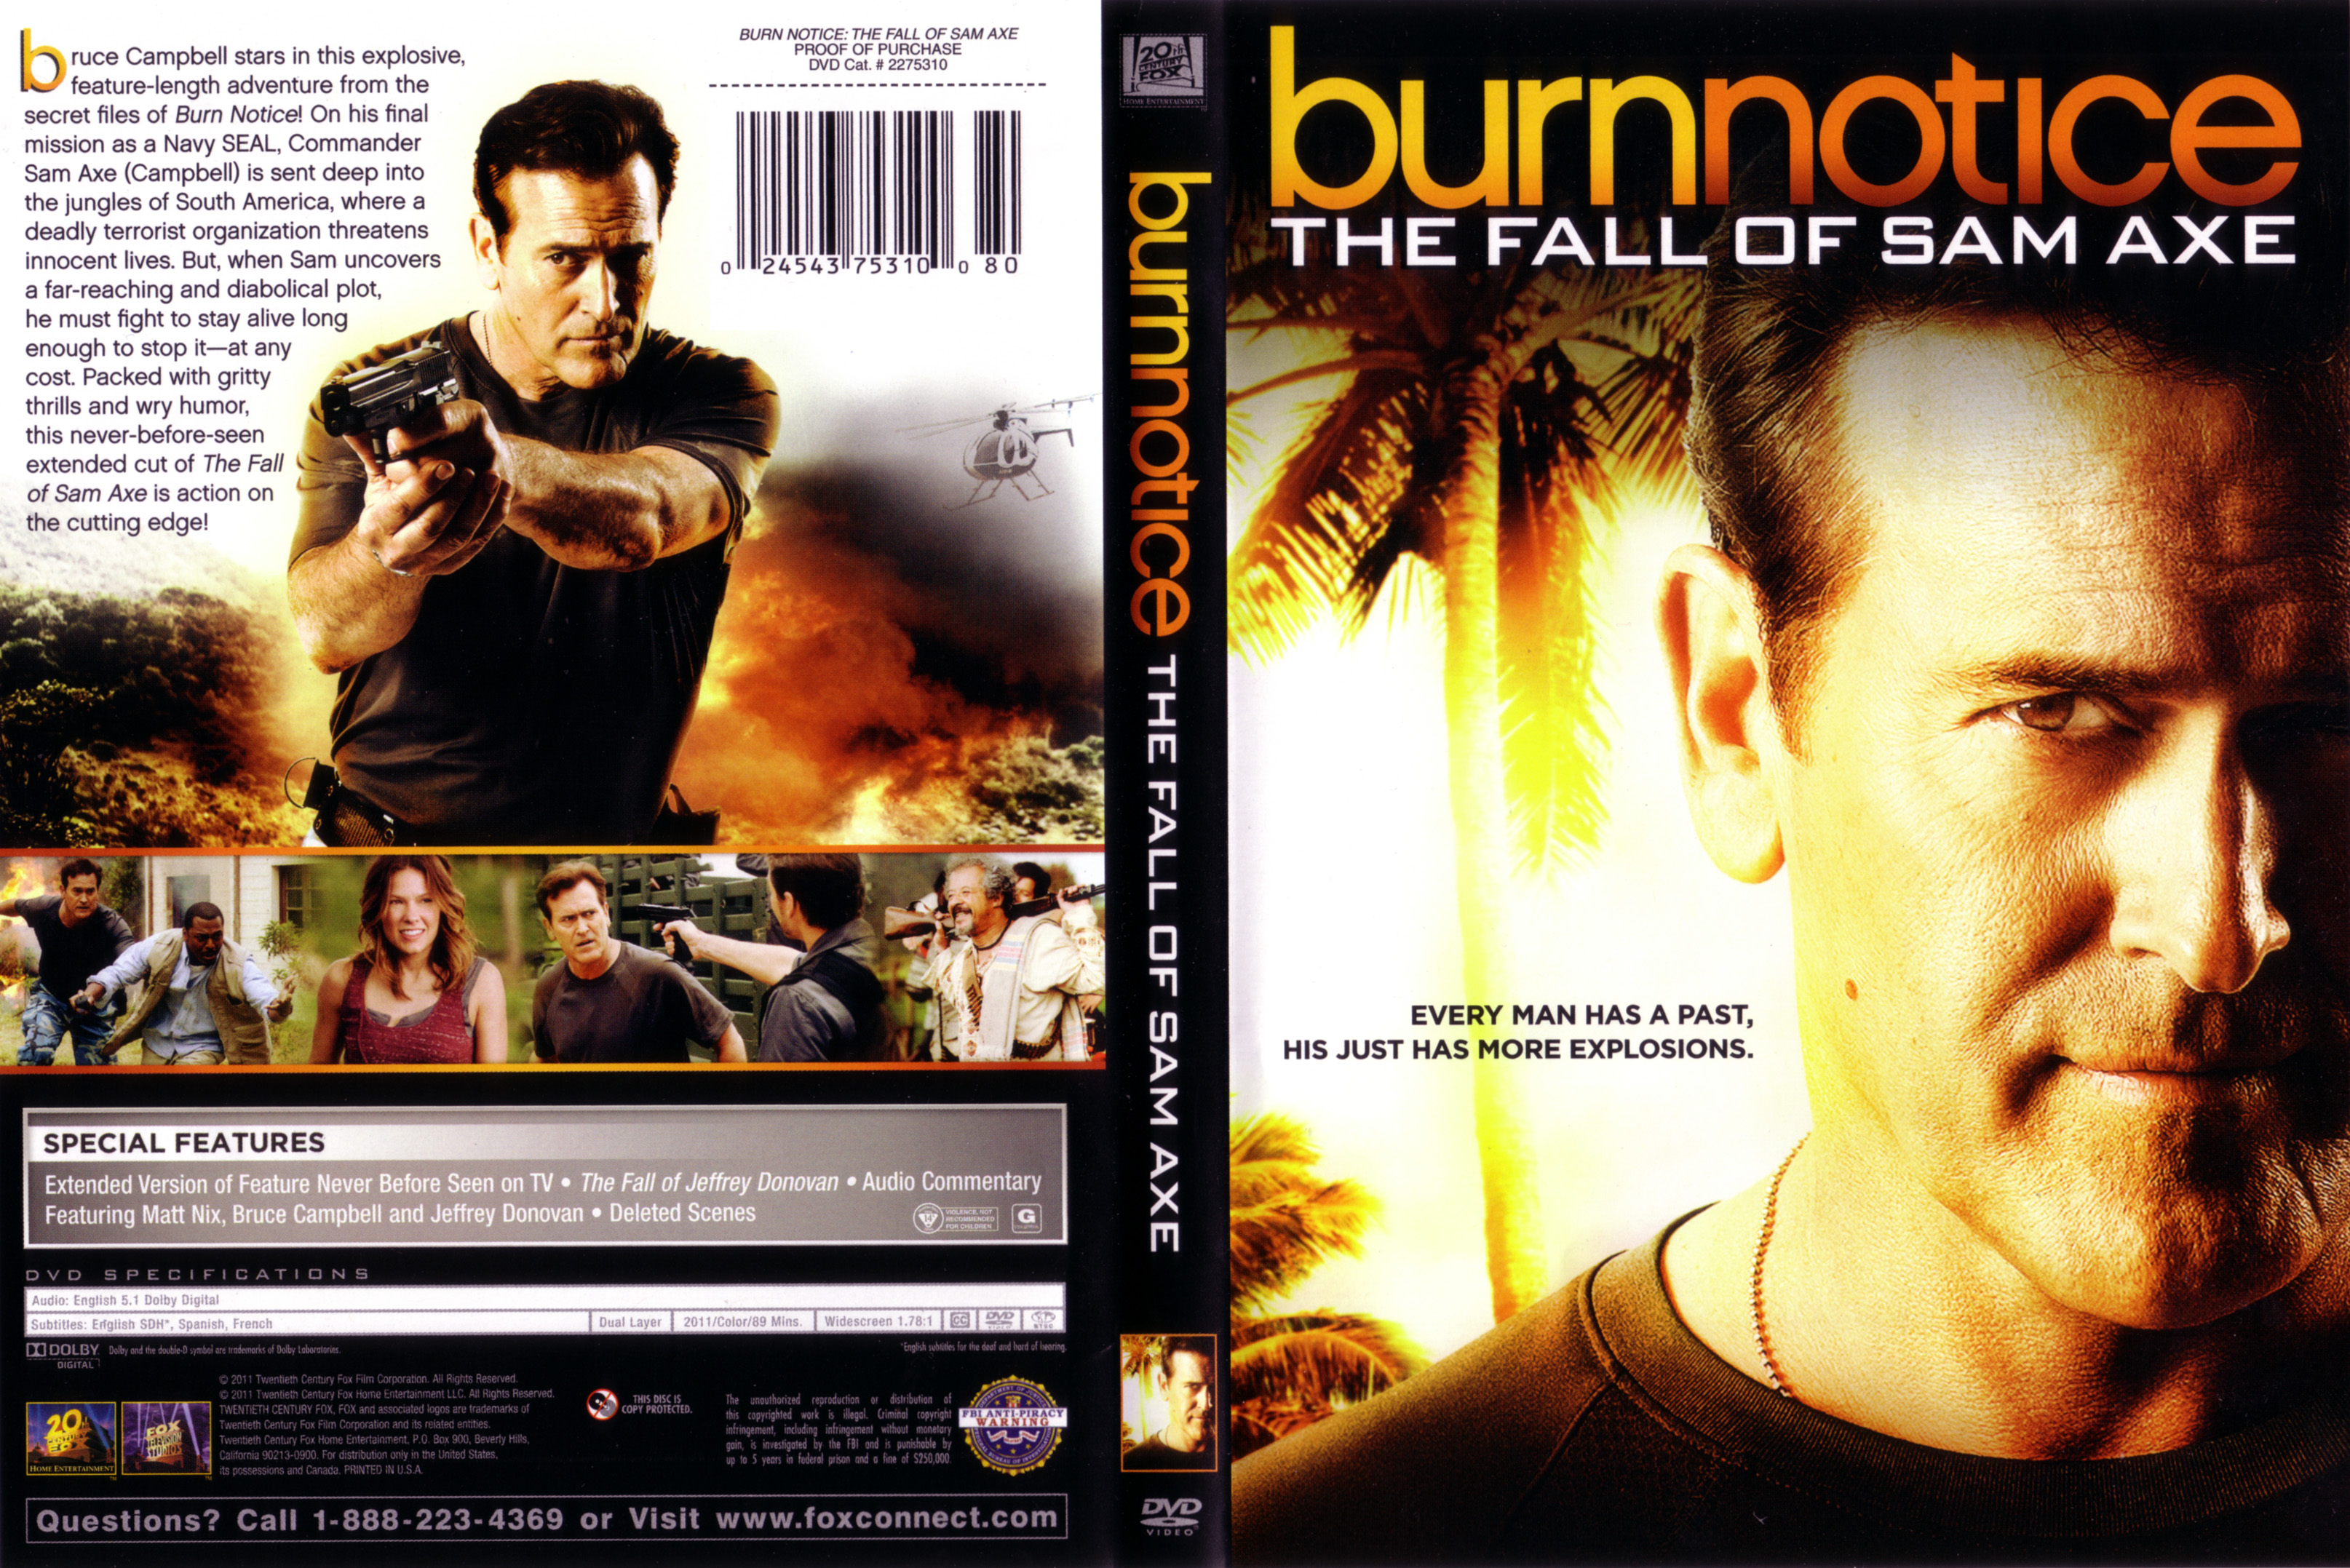 Jaquette DVD Burn notice the fall of sam axe Zone 1